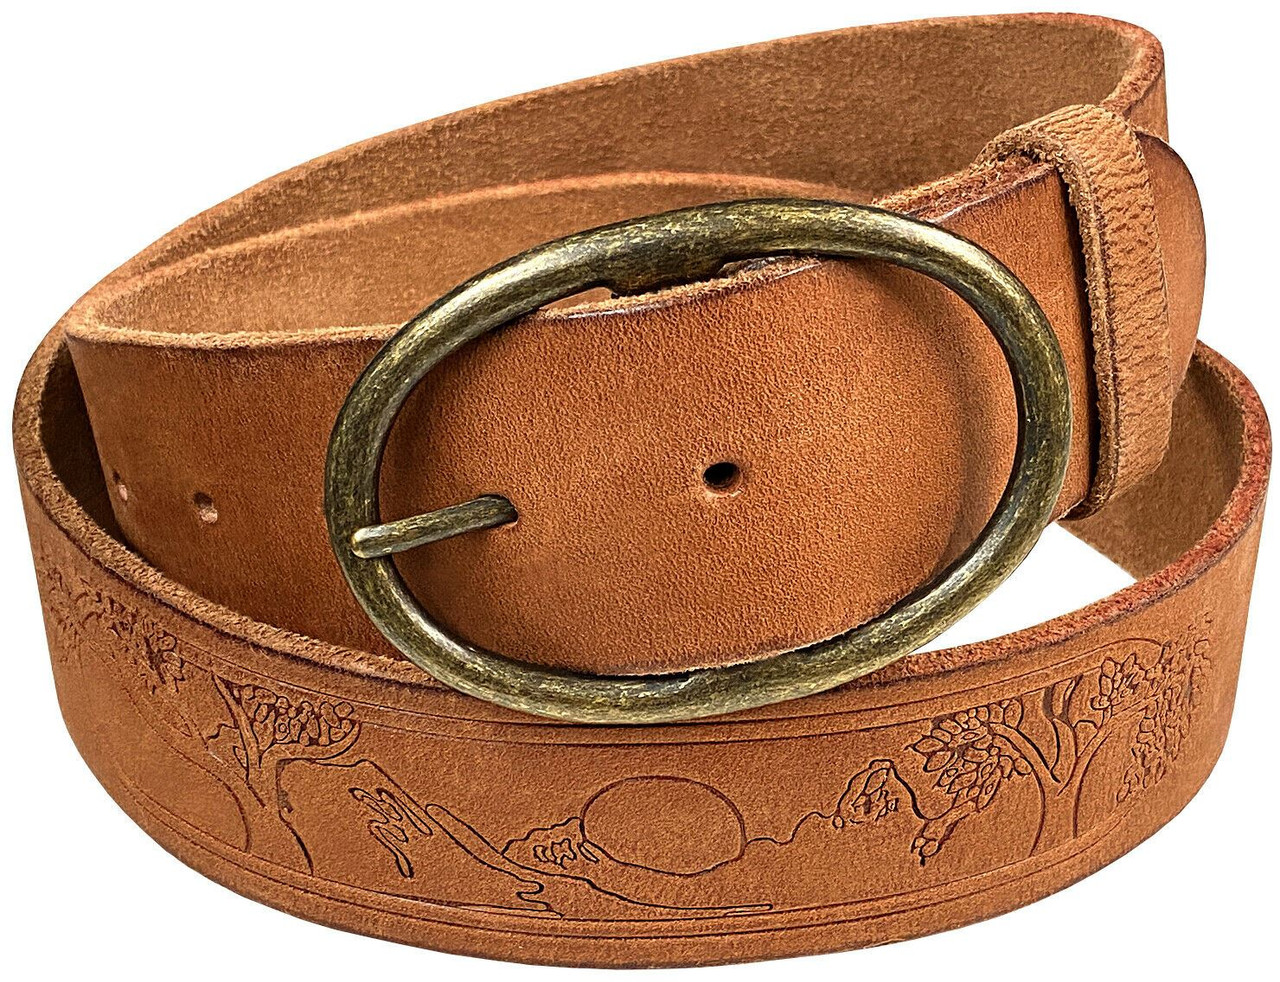 HIDE & SKIN Full Grain Genuine Leather Belt for Men, Belt for men leather, Formal Belt, Trouser Belt, Adjustable Free size fits 28-40 inches